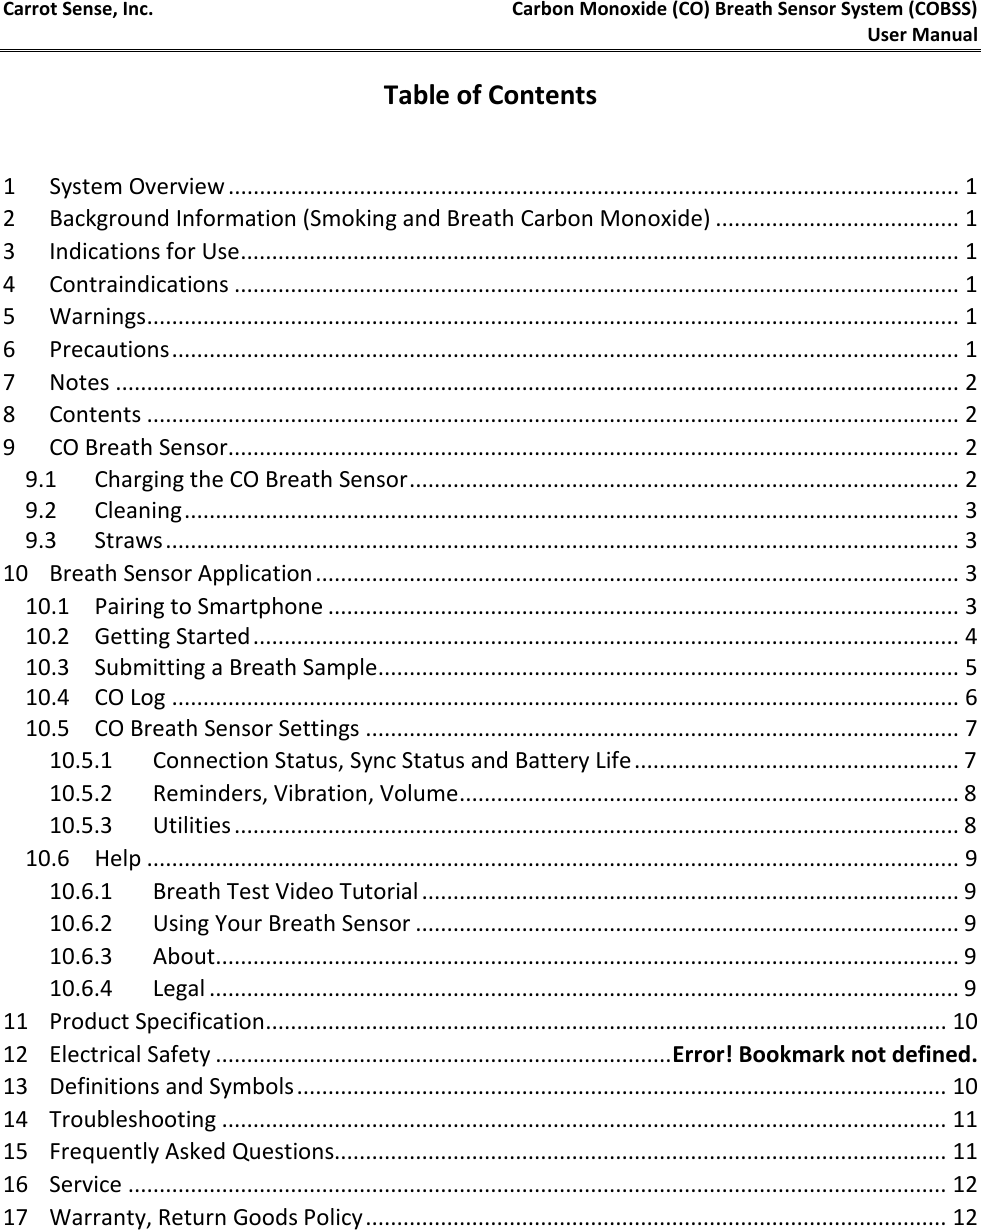 Carrot Sense, Inc. Carbon Monoxide (CO) Breath Sensor System (COBSS)  User Manual     Table of Contents  1  System Overview ..................................................................................................................... 1 2  Background Information (Smoking and Breath Carbon Monoxide) ....................................... 1 3  Indications for Use ................................................................................................................... 1 4  Contraindications .................................................................................................................... 1 5  Warnings .................................................................................................................................. 1 6  Precautions .............................................................................................................................. 1 7  Notes ....................................................................................................................................... 2 8  Contents .................................................................................................................................. 2 9  CO Breath Sensor ..................................................................................................................... 2 9.1 Charging the CO Breath Sensor ........................................................................................ 2 9.2 Cleaning ............................................................................................................................ 3 9.3 Straws ............................................................................................................................... 3 10 Breath Sensor Application ....................................................................................................... 3 10.1 Pairing to Smartphone ..................................................................................................... 3 10.2 Getting Started ................................................................................................................. 4 10.3 Submitting a Breath Sample ............................................................................................. 5 10.4 CO Log .............................................................................................................................. 6 10.5 CO Breath Sensor Settings ............................................................................................... 7 10.5.1 Connection Status, Sync Status and Battery Life .................................................... 7 10.5.2 Reminders, Vibration, Volume ................................................................................ 8 10.5.3 Utilities .................................................................................................................... 8 10.6 Help .................................................................................................................................. 9 10.6.1 Breath Test Video Tutorial ...................................................................................... 9 10.6.2 Using Your Breath Sensor ....................................................................................... 9 10.6.3 About ....................................................................................................................... 9 10.6.4 Legal ........................................................................................................................ 9 11 Product Specification ............................................................................................................. 10 12 Electrical Safety ......................................................................... Error! Bookmark not defined. 13 Definitions and Symbols ........................................................................................................ 10 14 Troubleshooting .................................................................................................................... 11 15 Frequently Asked Questions.................................................................................................. 11 16 Service ................................................................................................................................... 12 17 Warranty, Return Goods Policy ............................................................................................. 12    